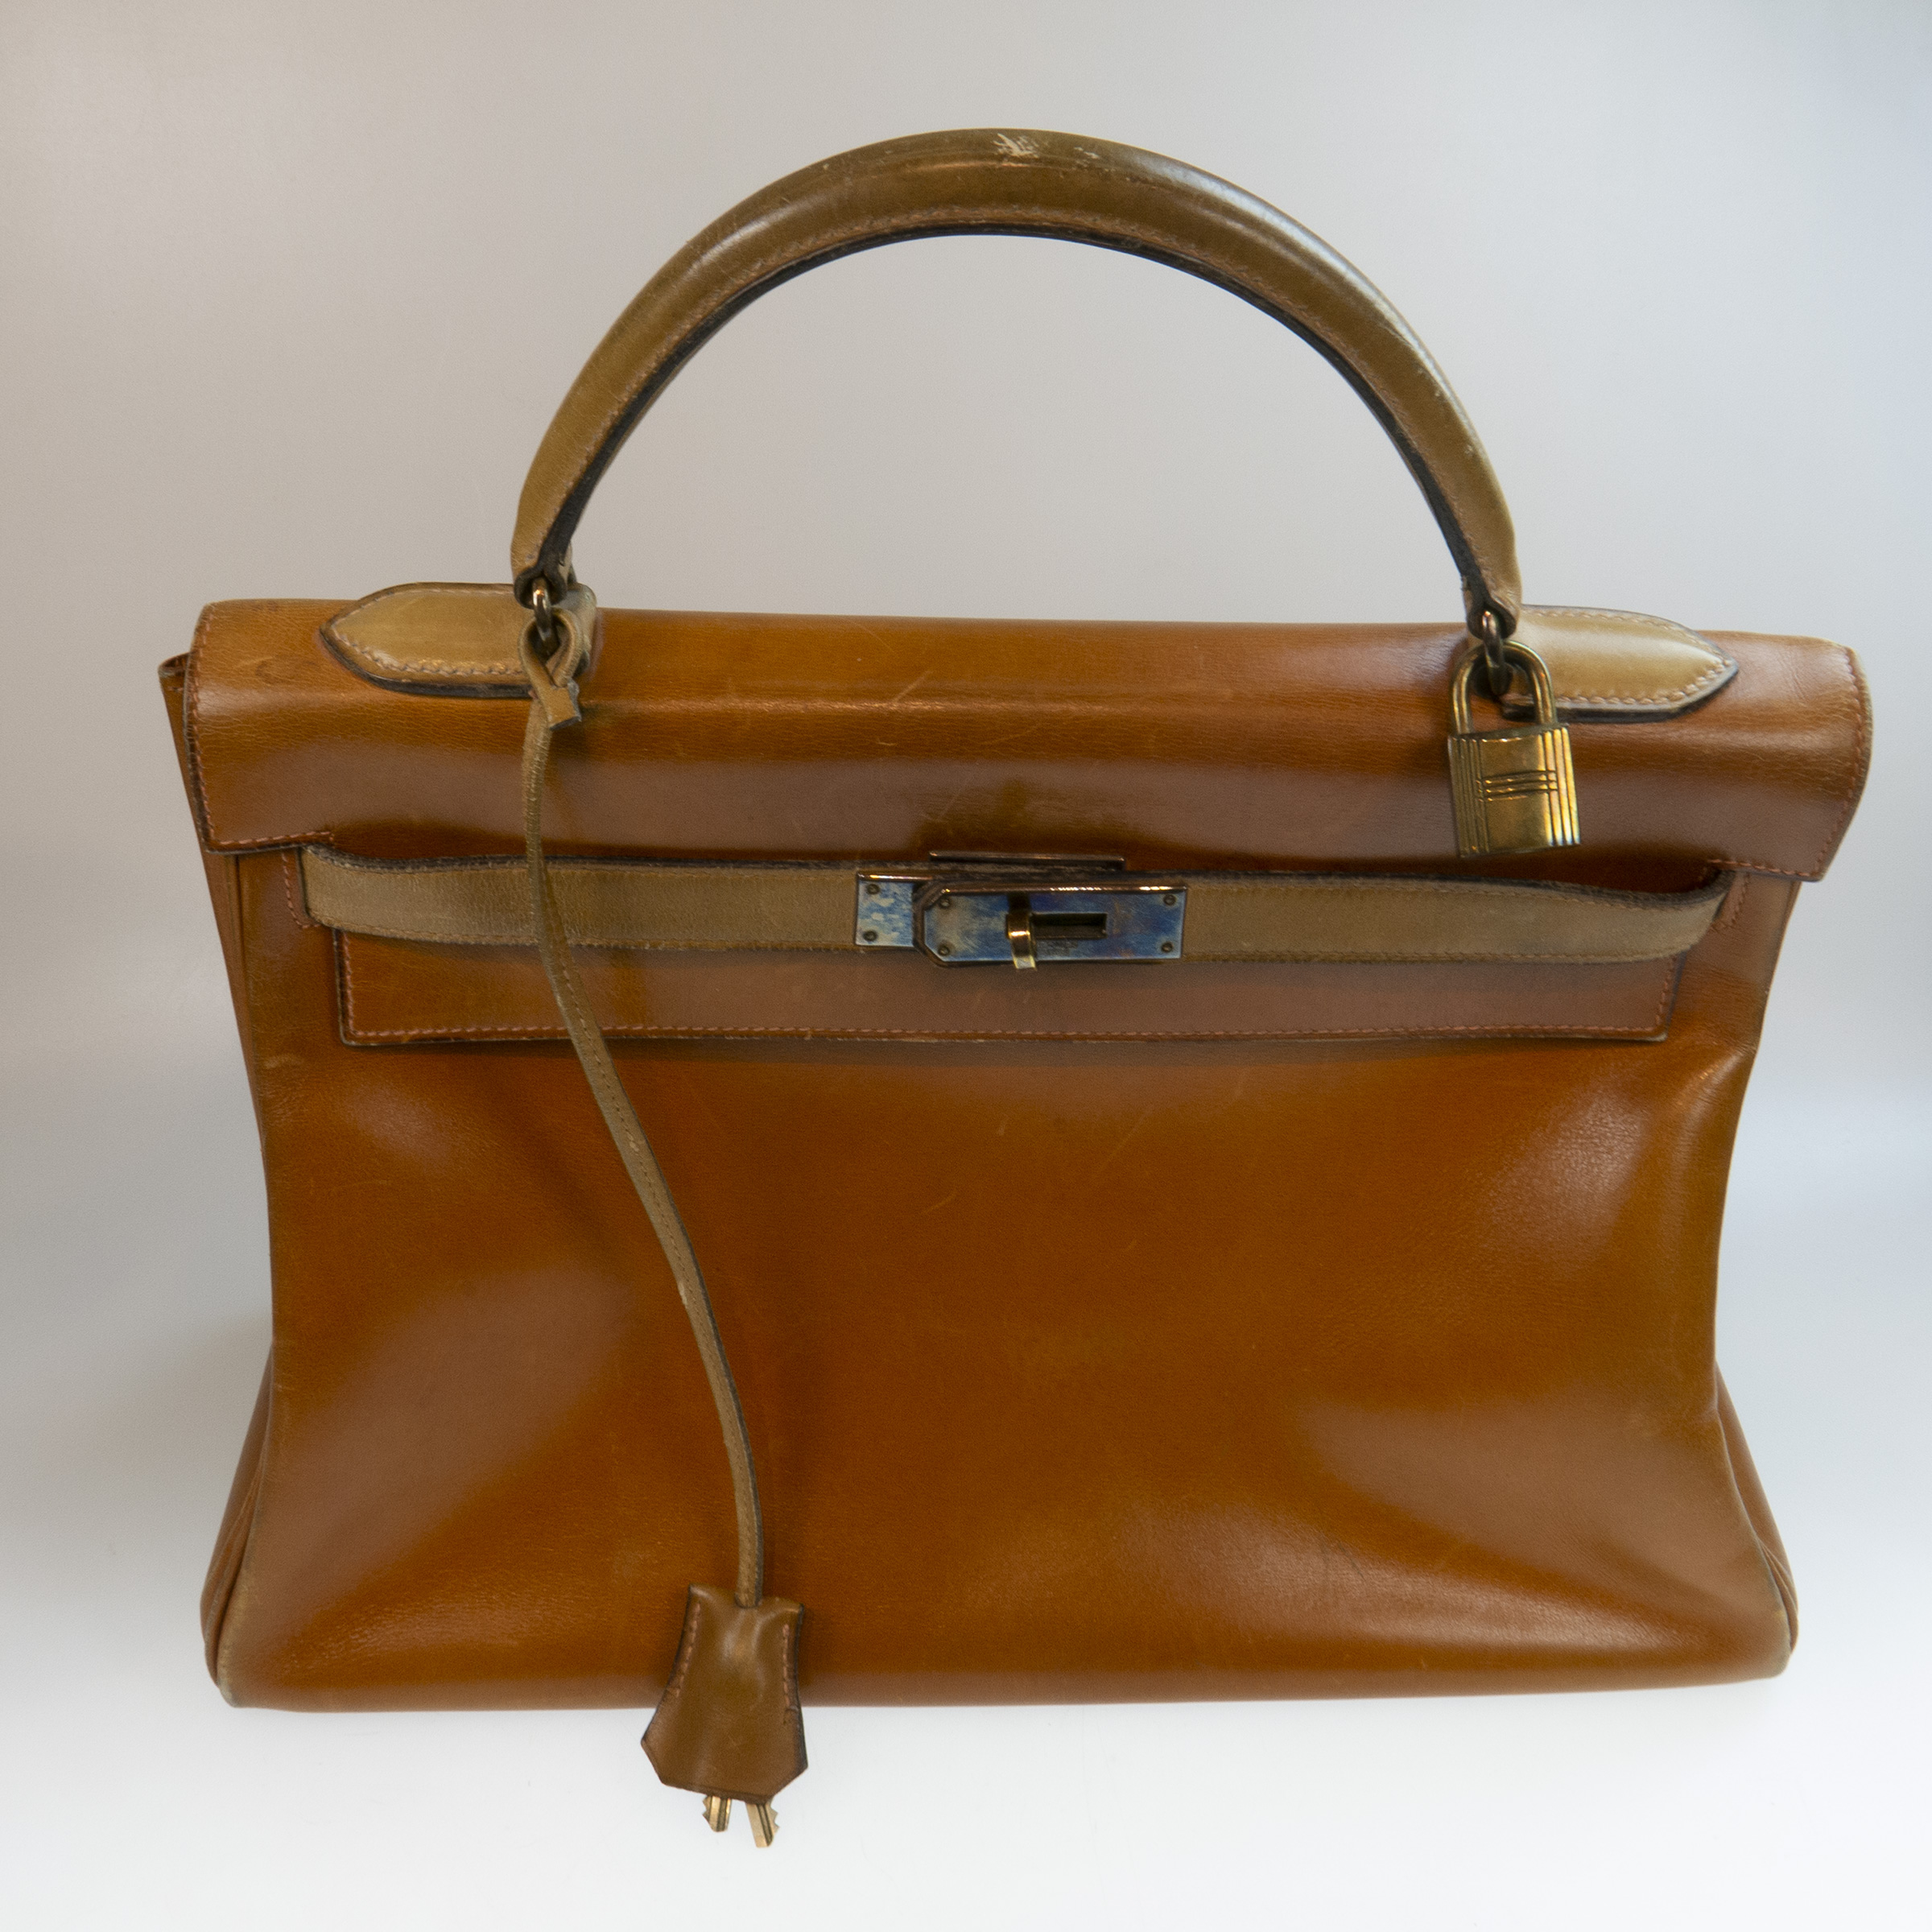 Hermes Kelly Top Handle Gold Leather Bag